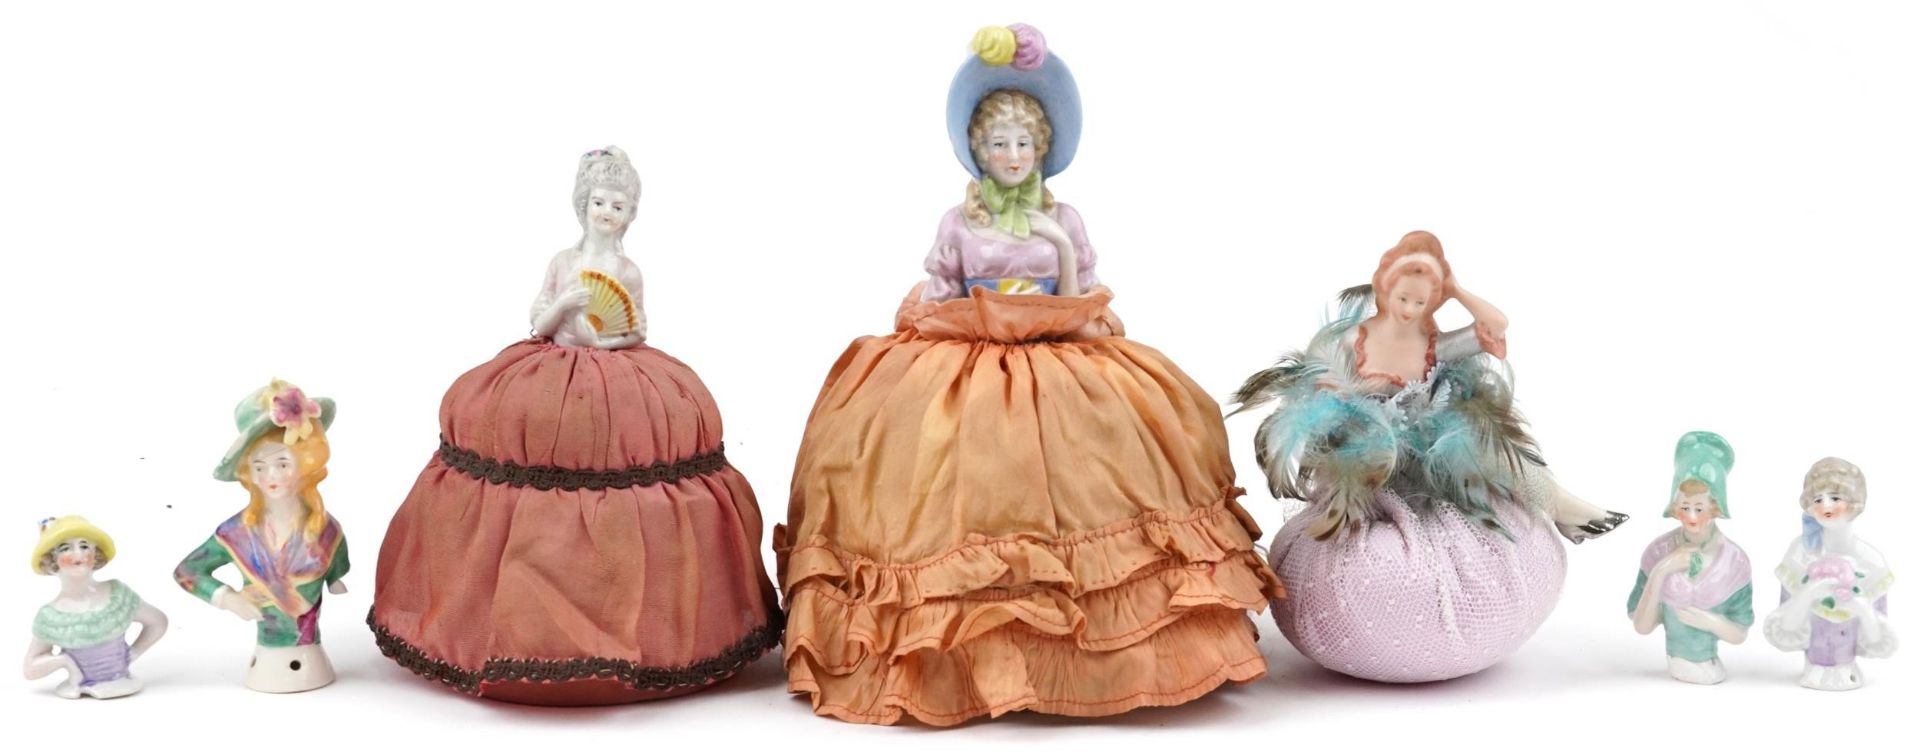 19th century and later half pin dolls including three pin cushions, the largest 21cm high